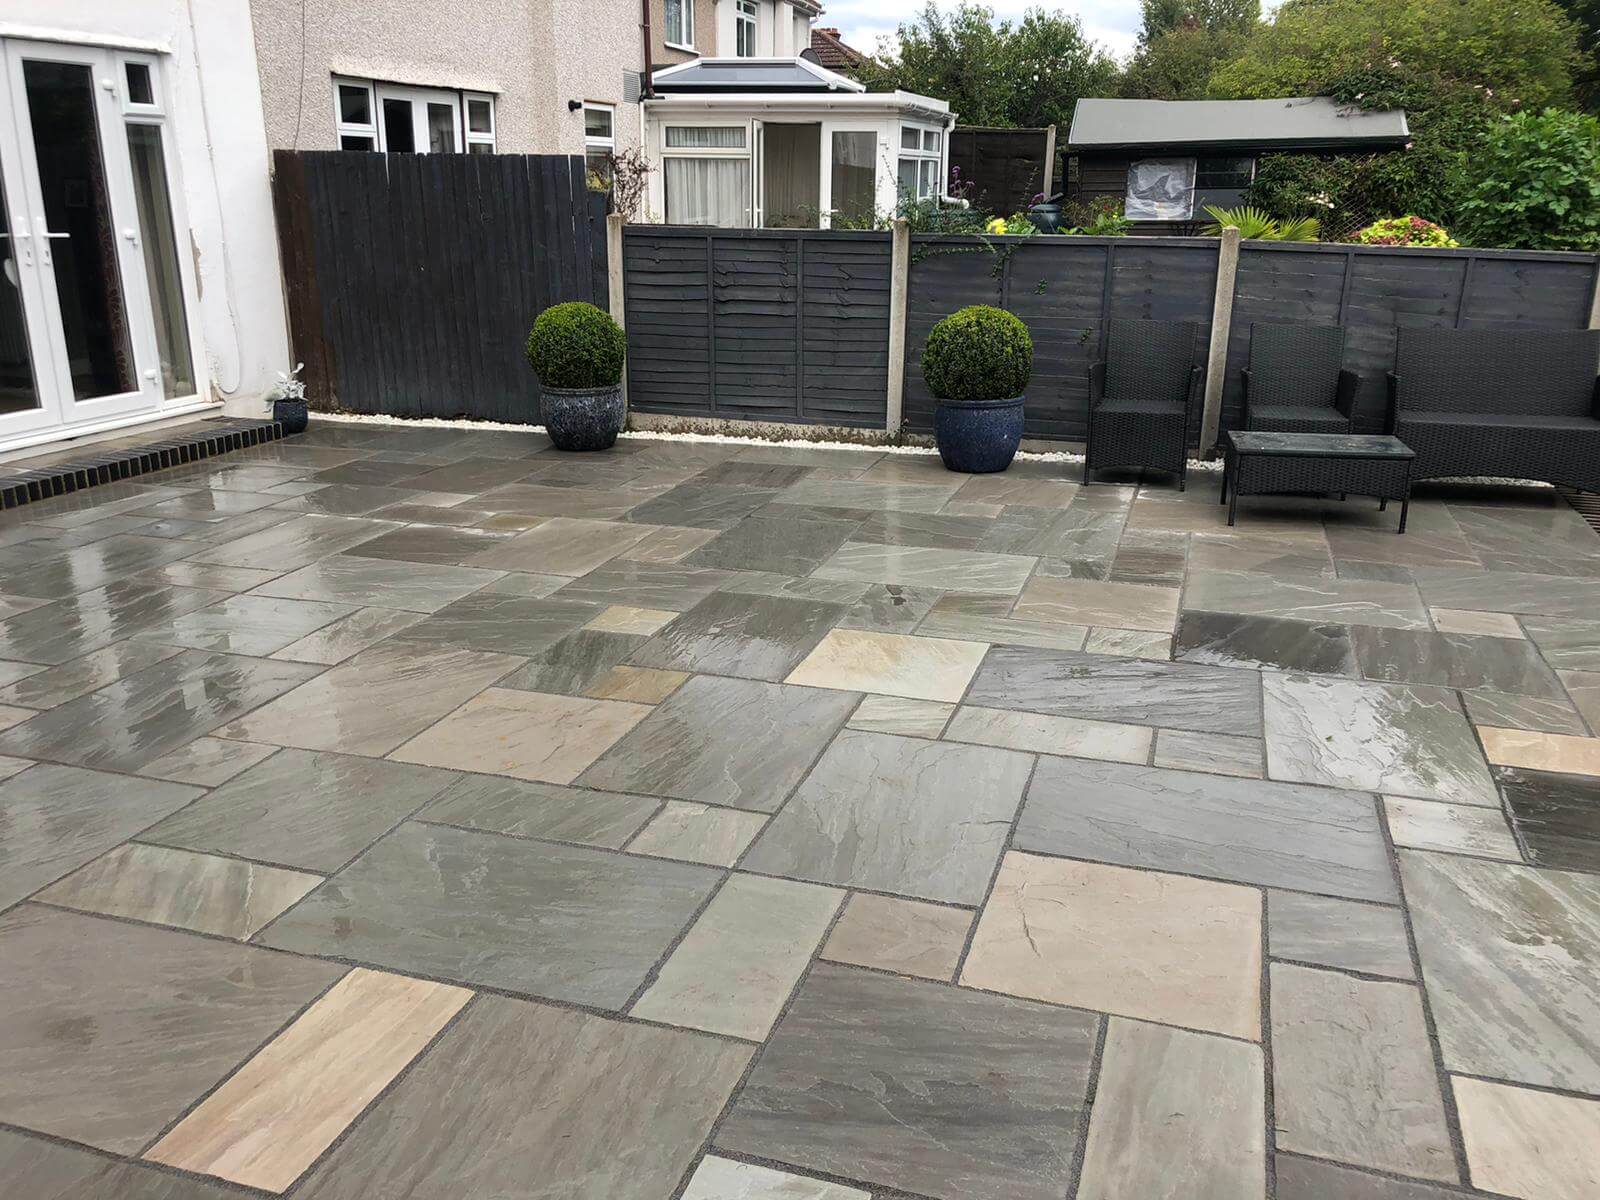 Indian Sandstone Paving Contractor Orpington BR6 / BR5